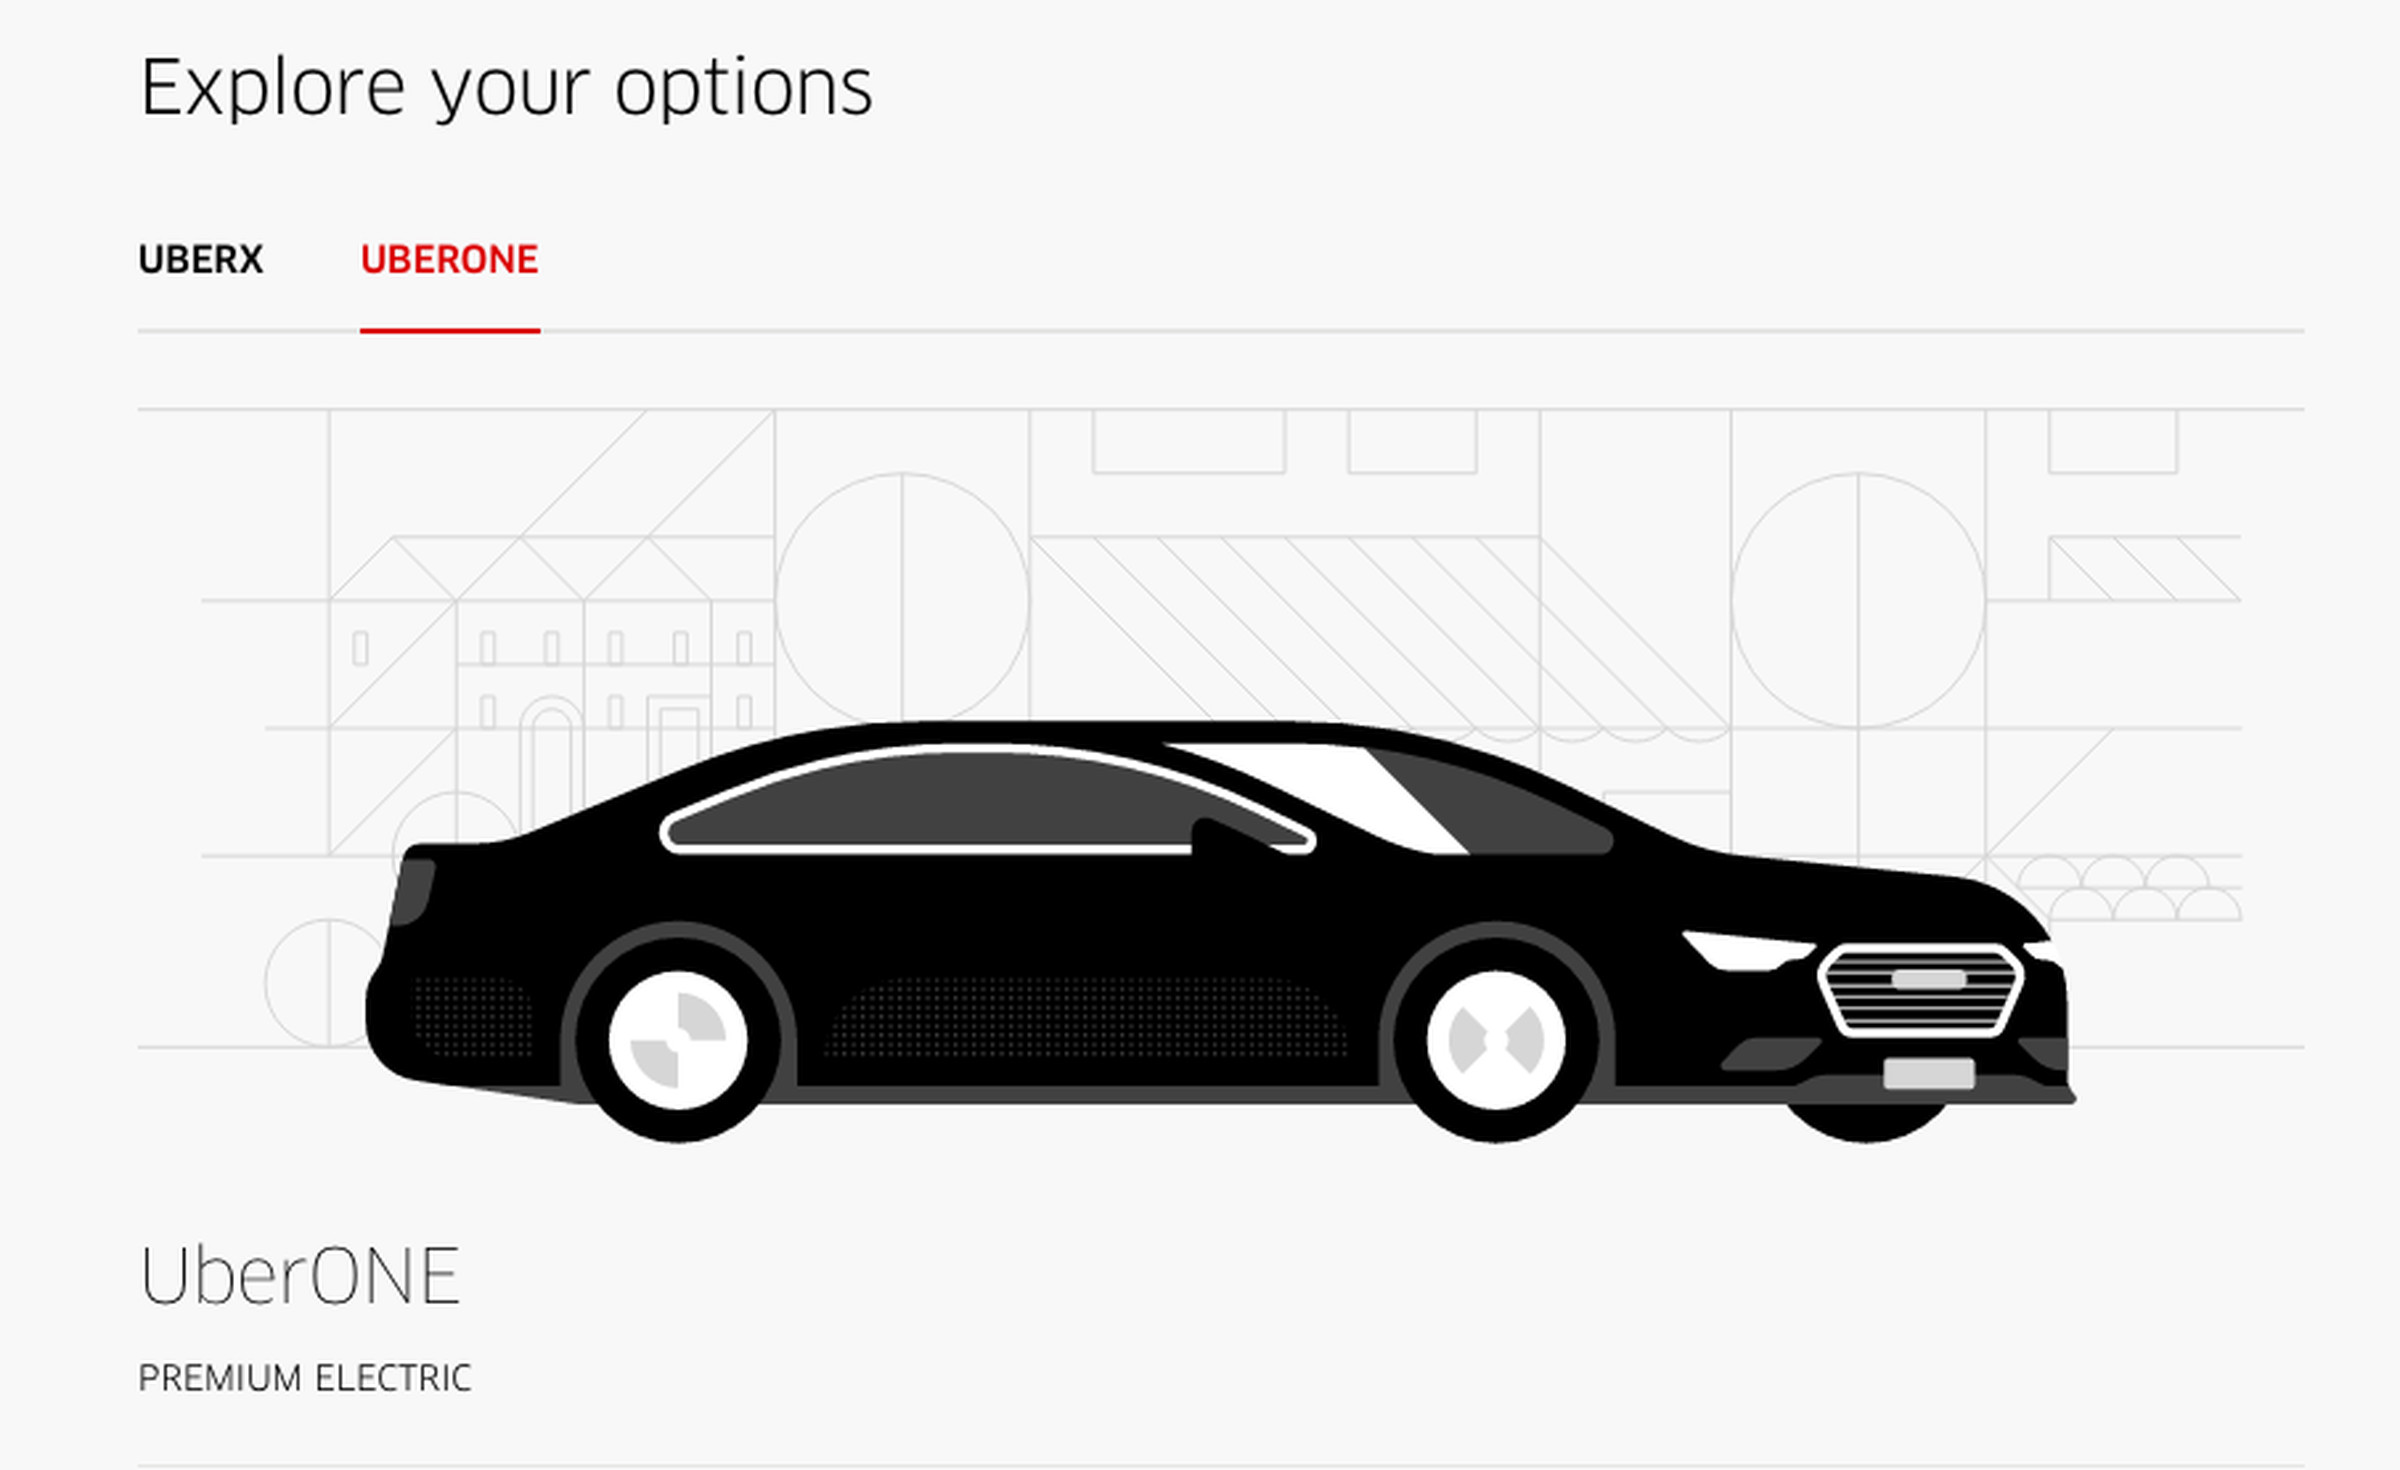 Tesla’s are available in Madrid via the premium UberONE service. 